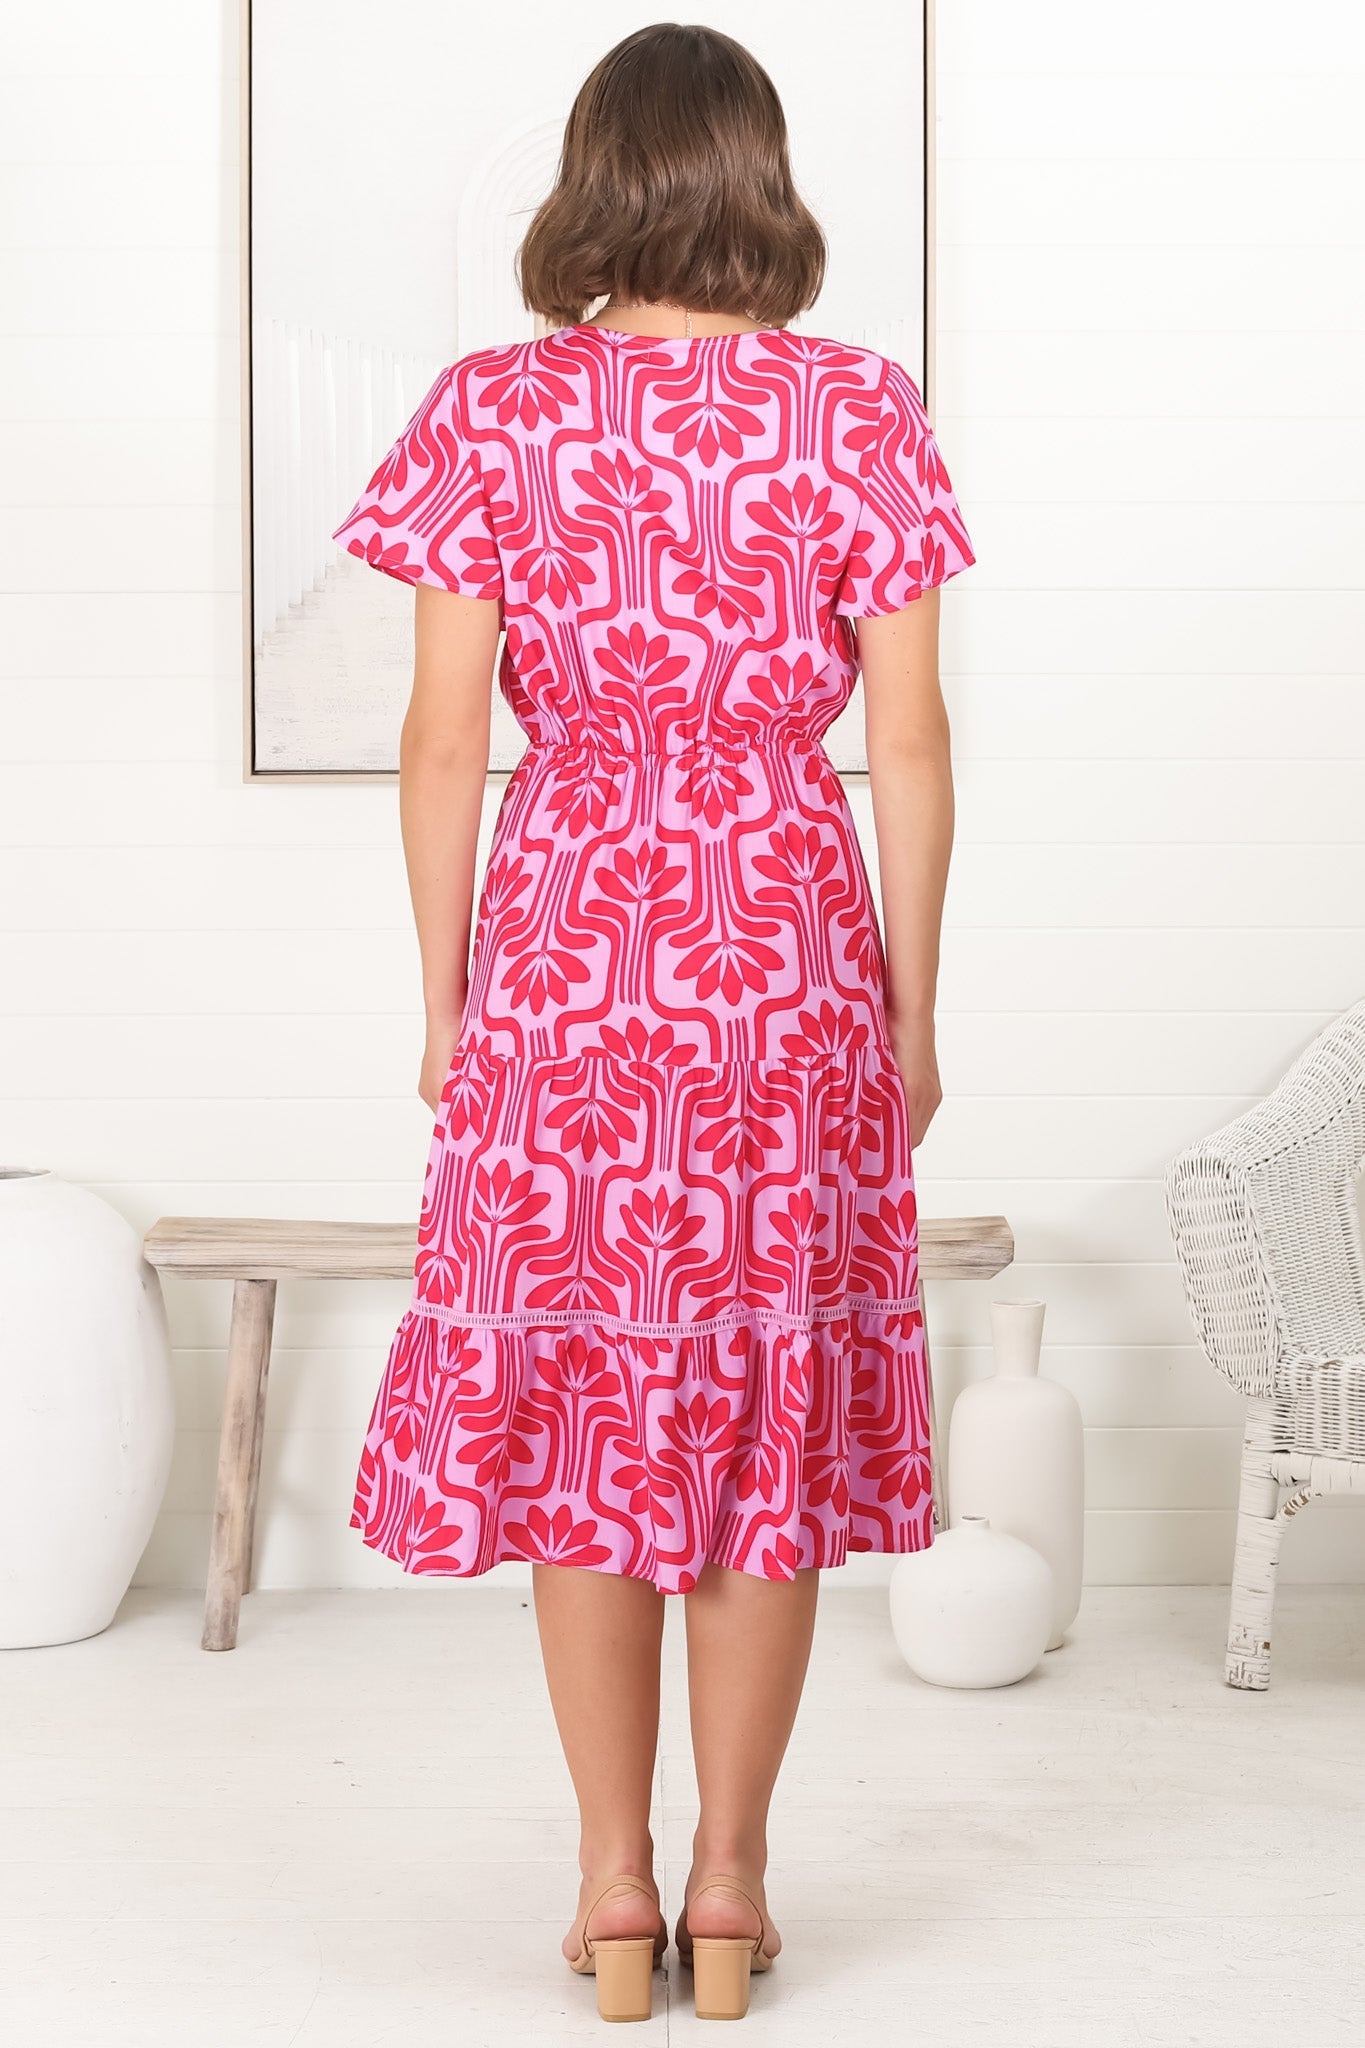 Kris Midi Dress - Cross Bodice A Line Dress with Crochet Spilicing in Luvira Print Pink